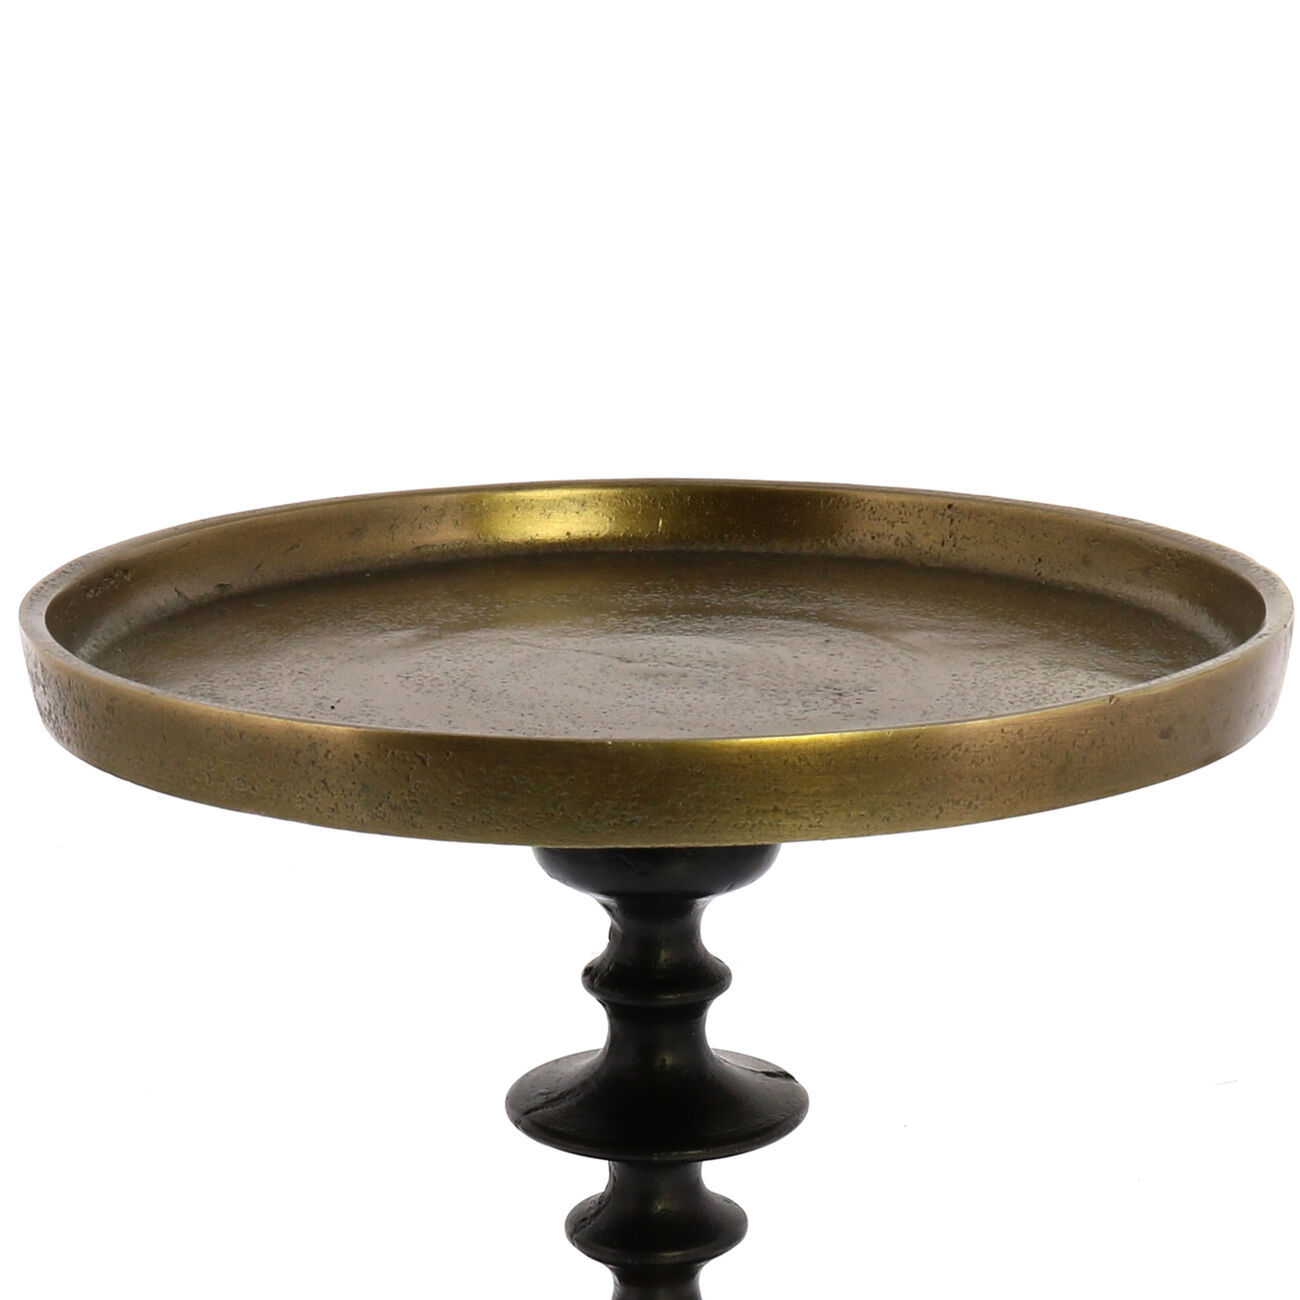 Pedestal with Turned Base, Small, Black and Gold